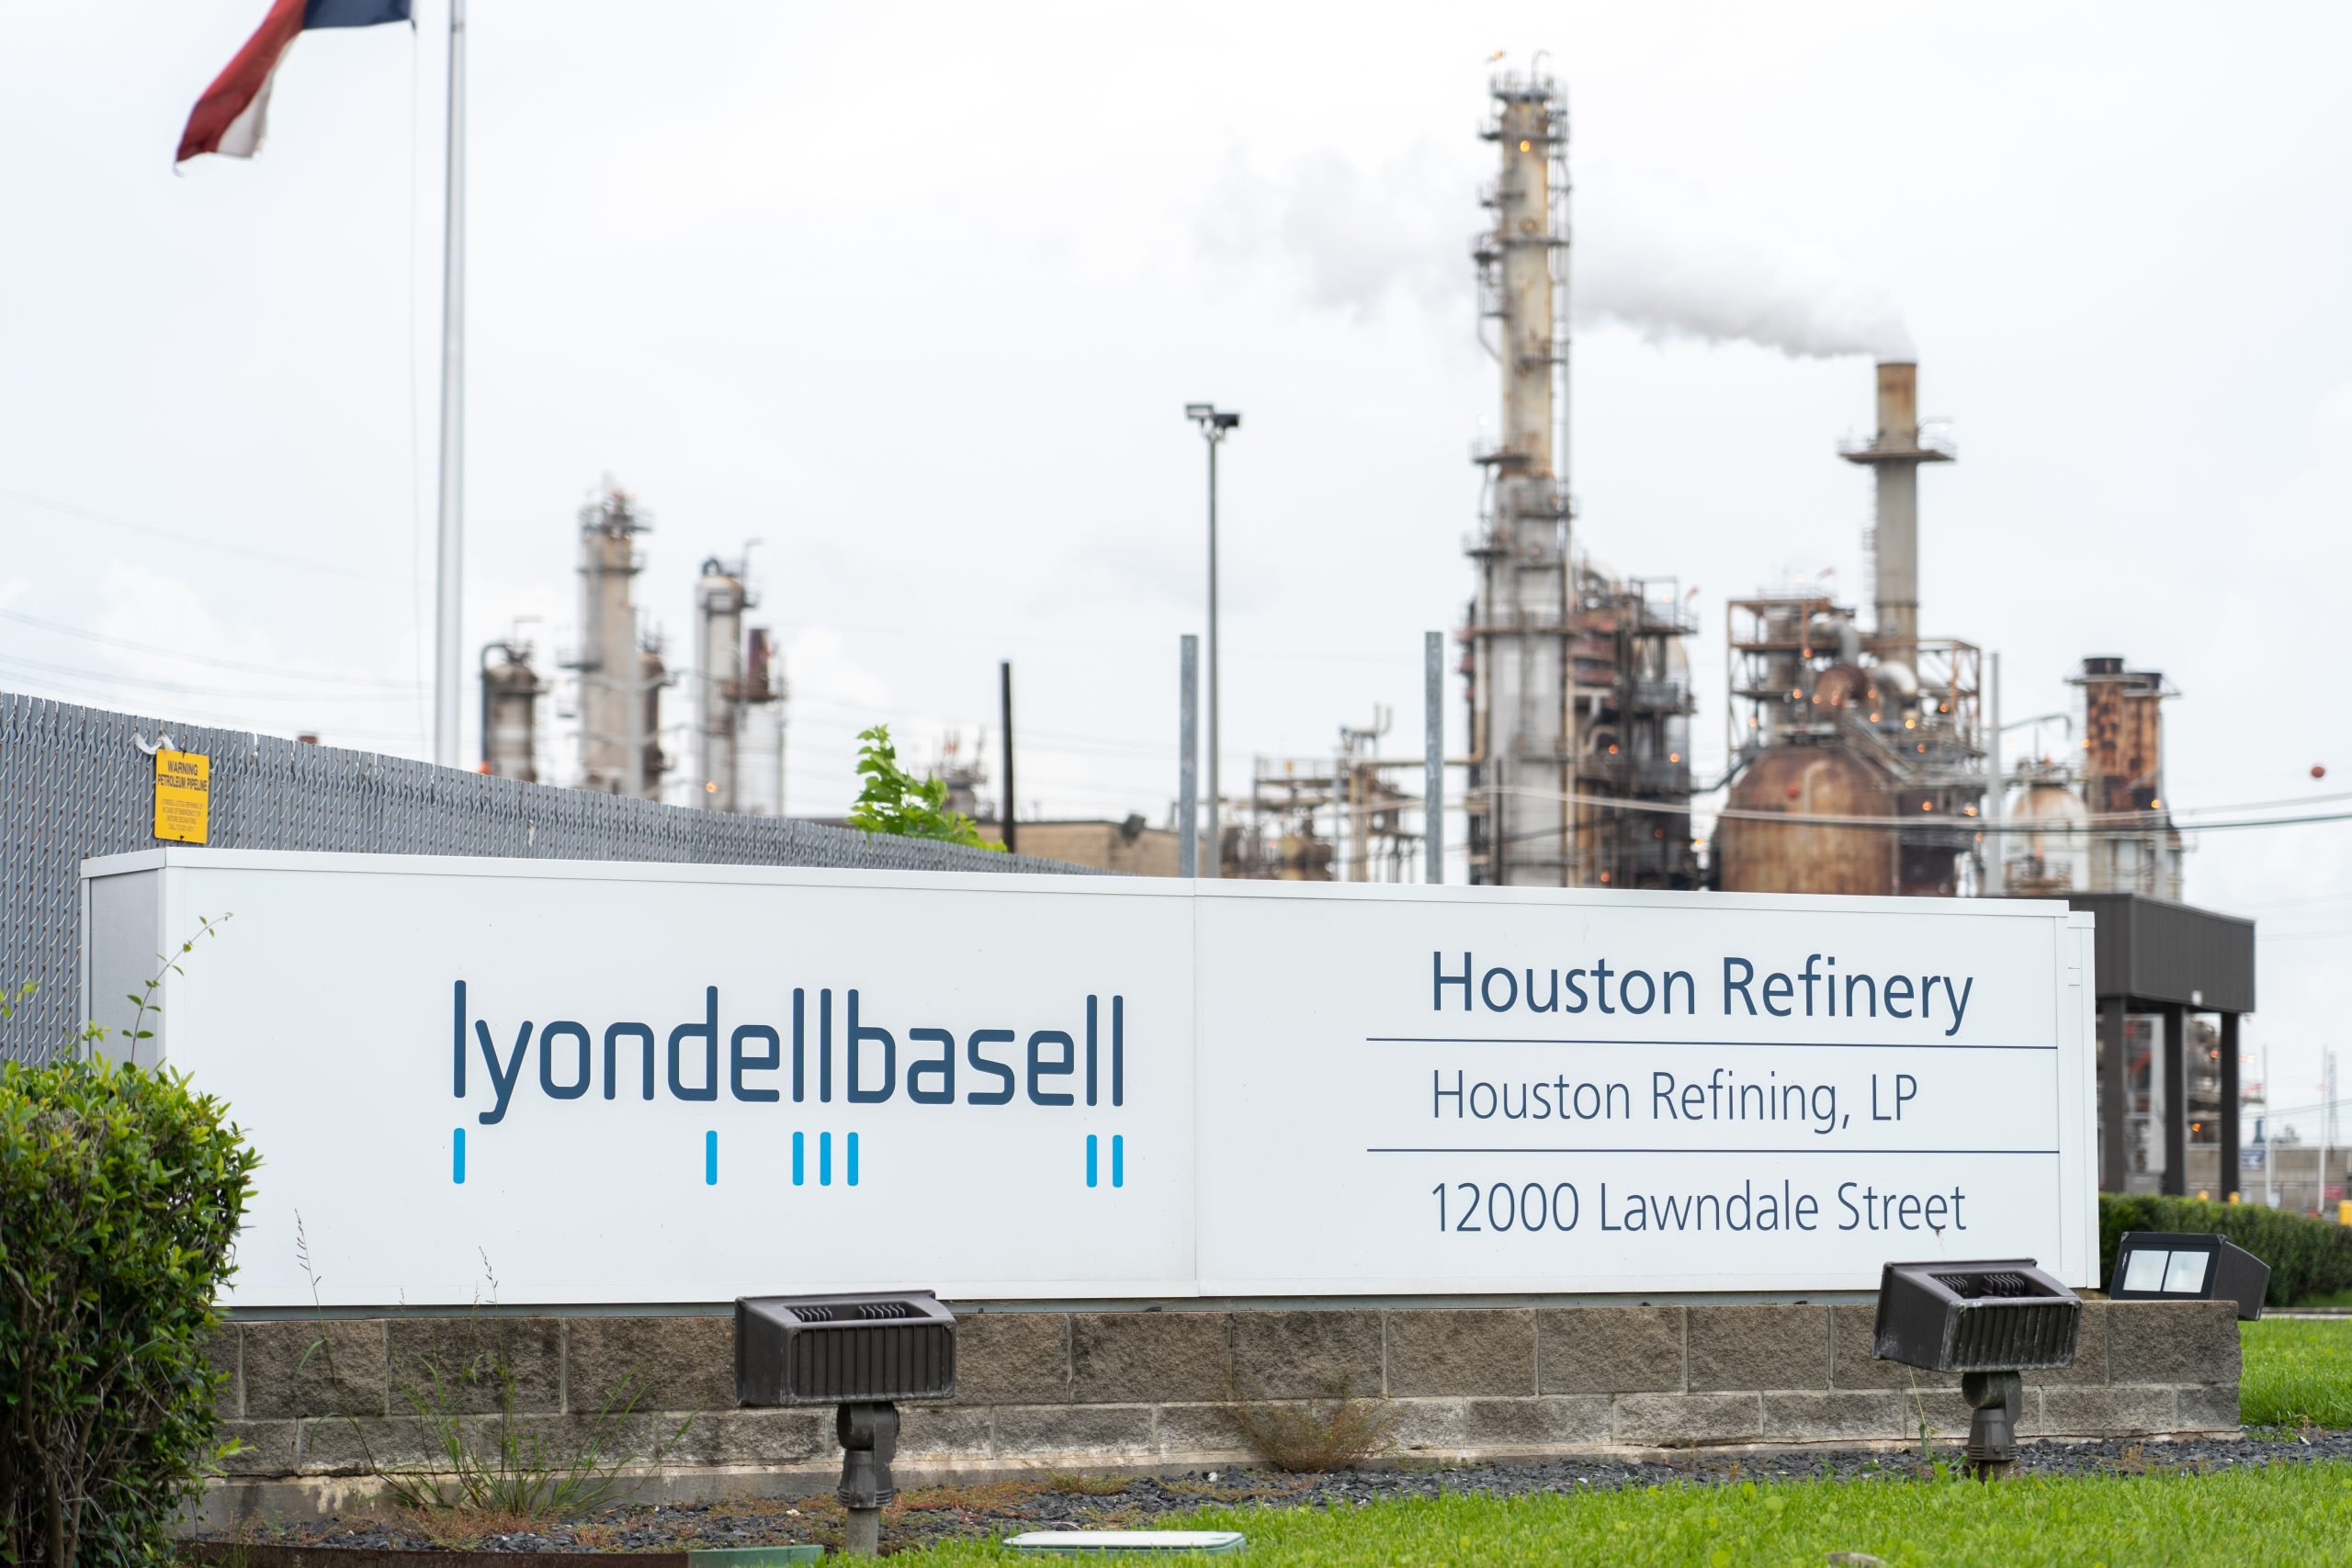 LyondellBasell announces plans to exit refining business - BIC Magazine